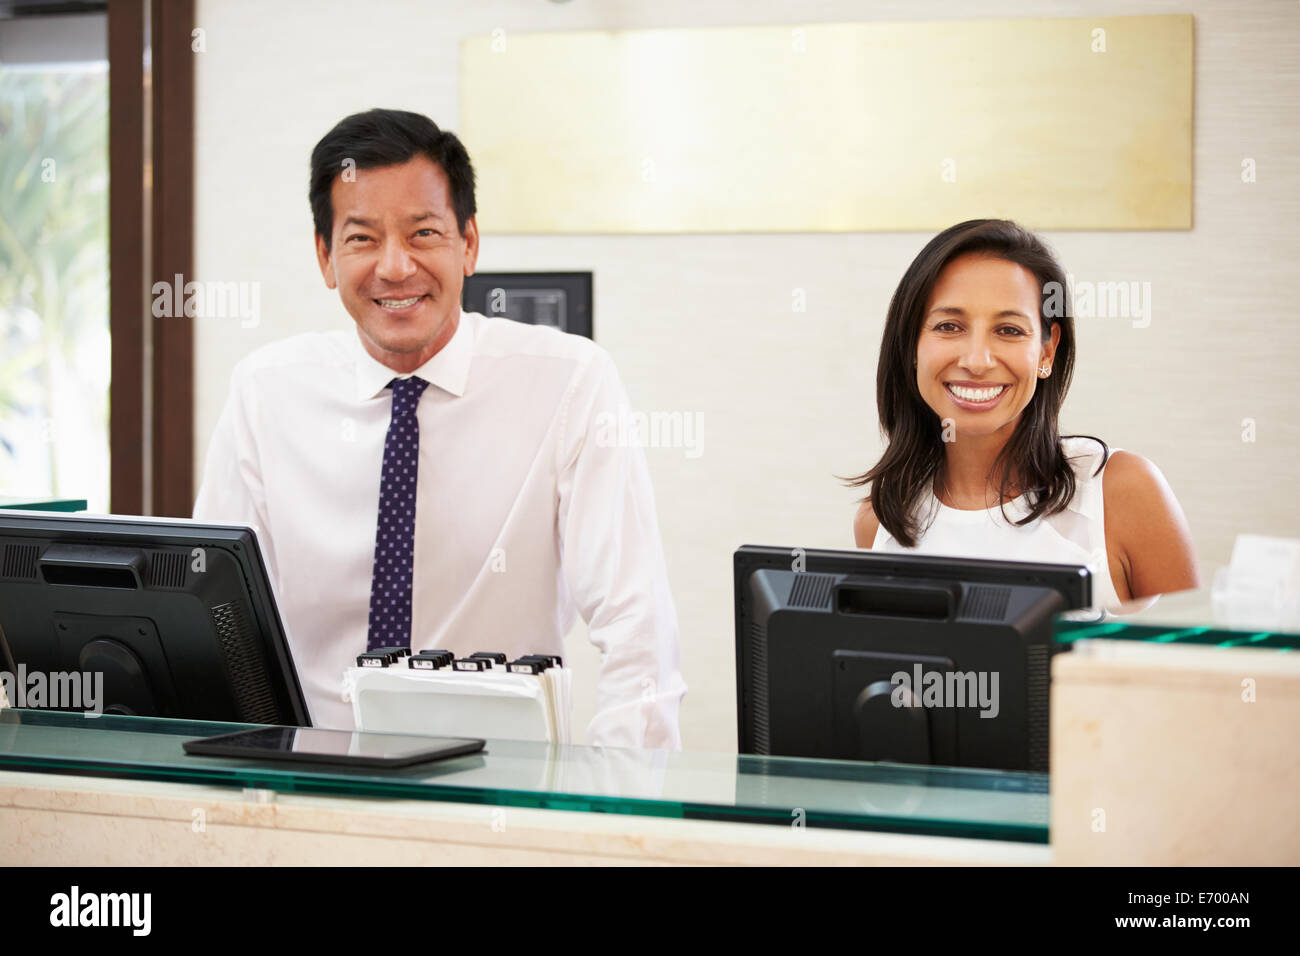 Portrait Of Reception Staff At Hotel Front Desk Stock Photo